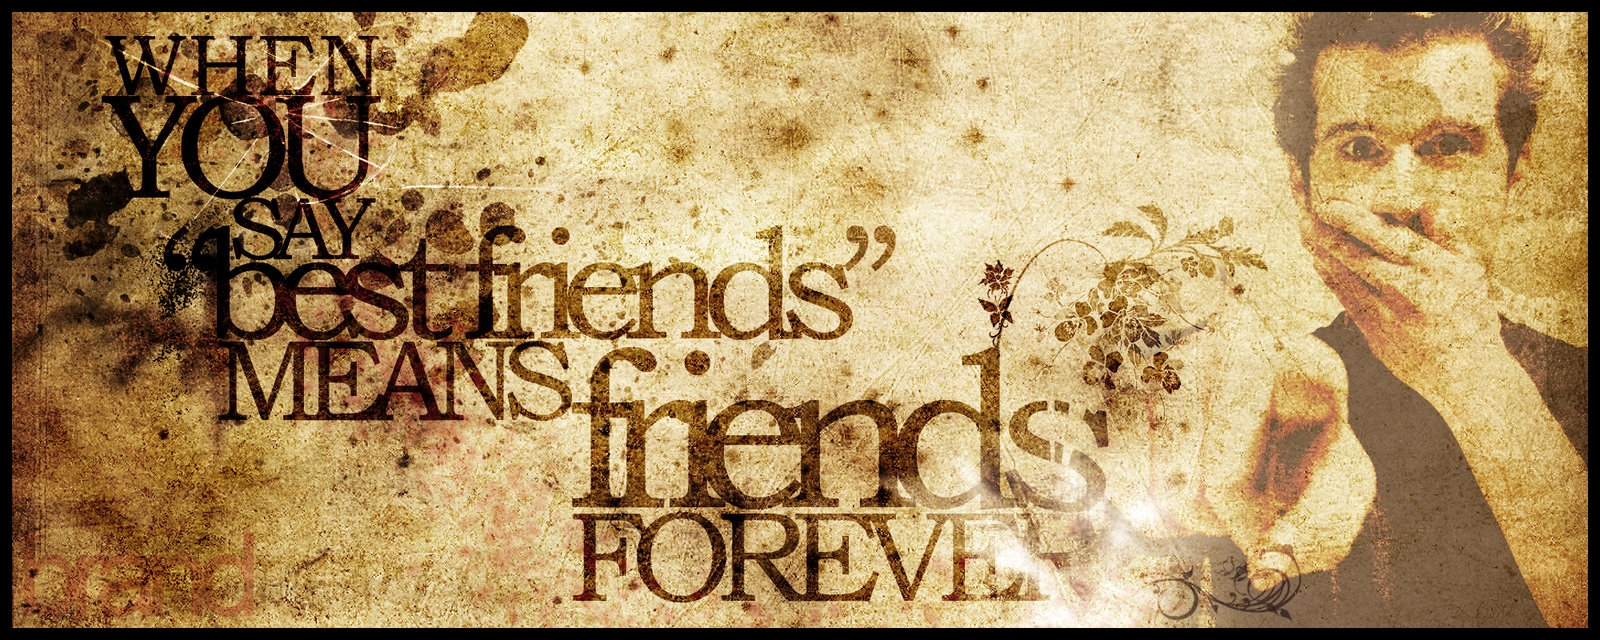 friends forever hd wallpapers,font,text,stock photography,graphic design,calligraphy